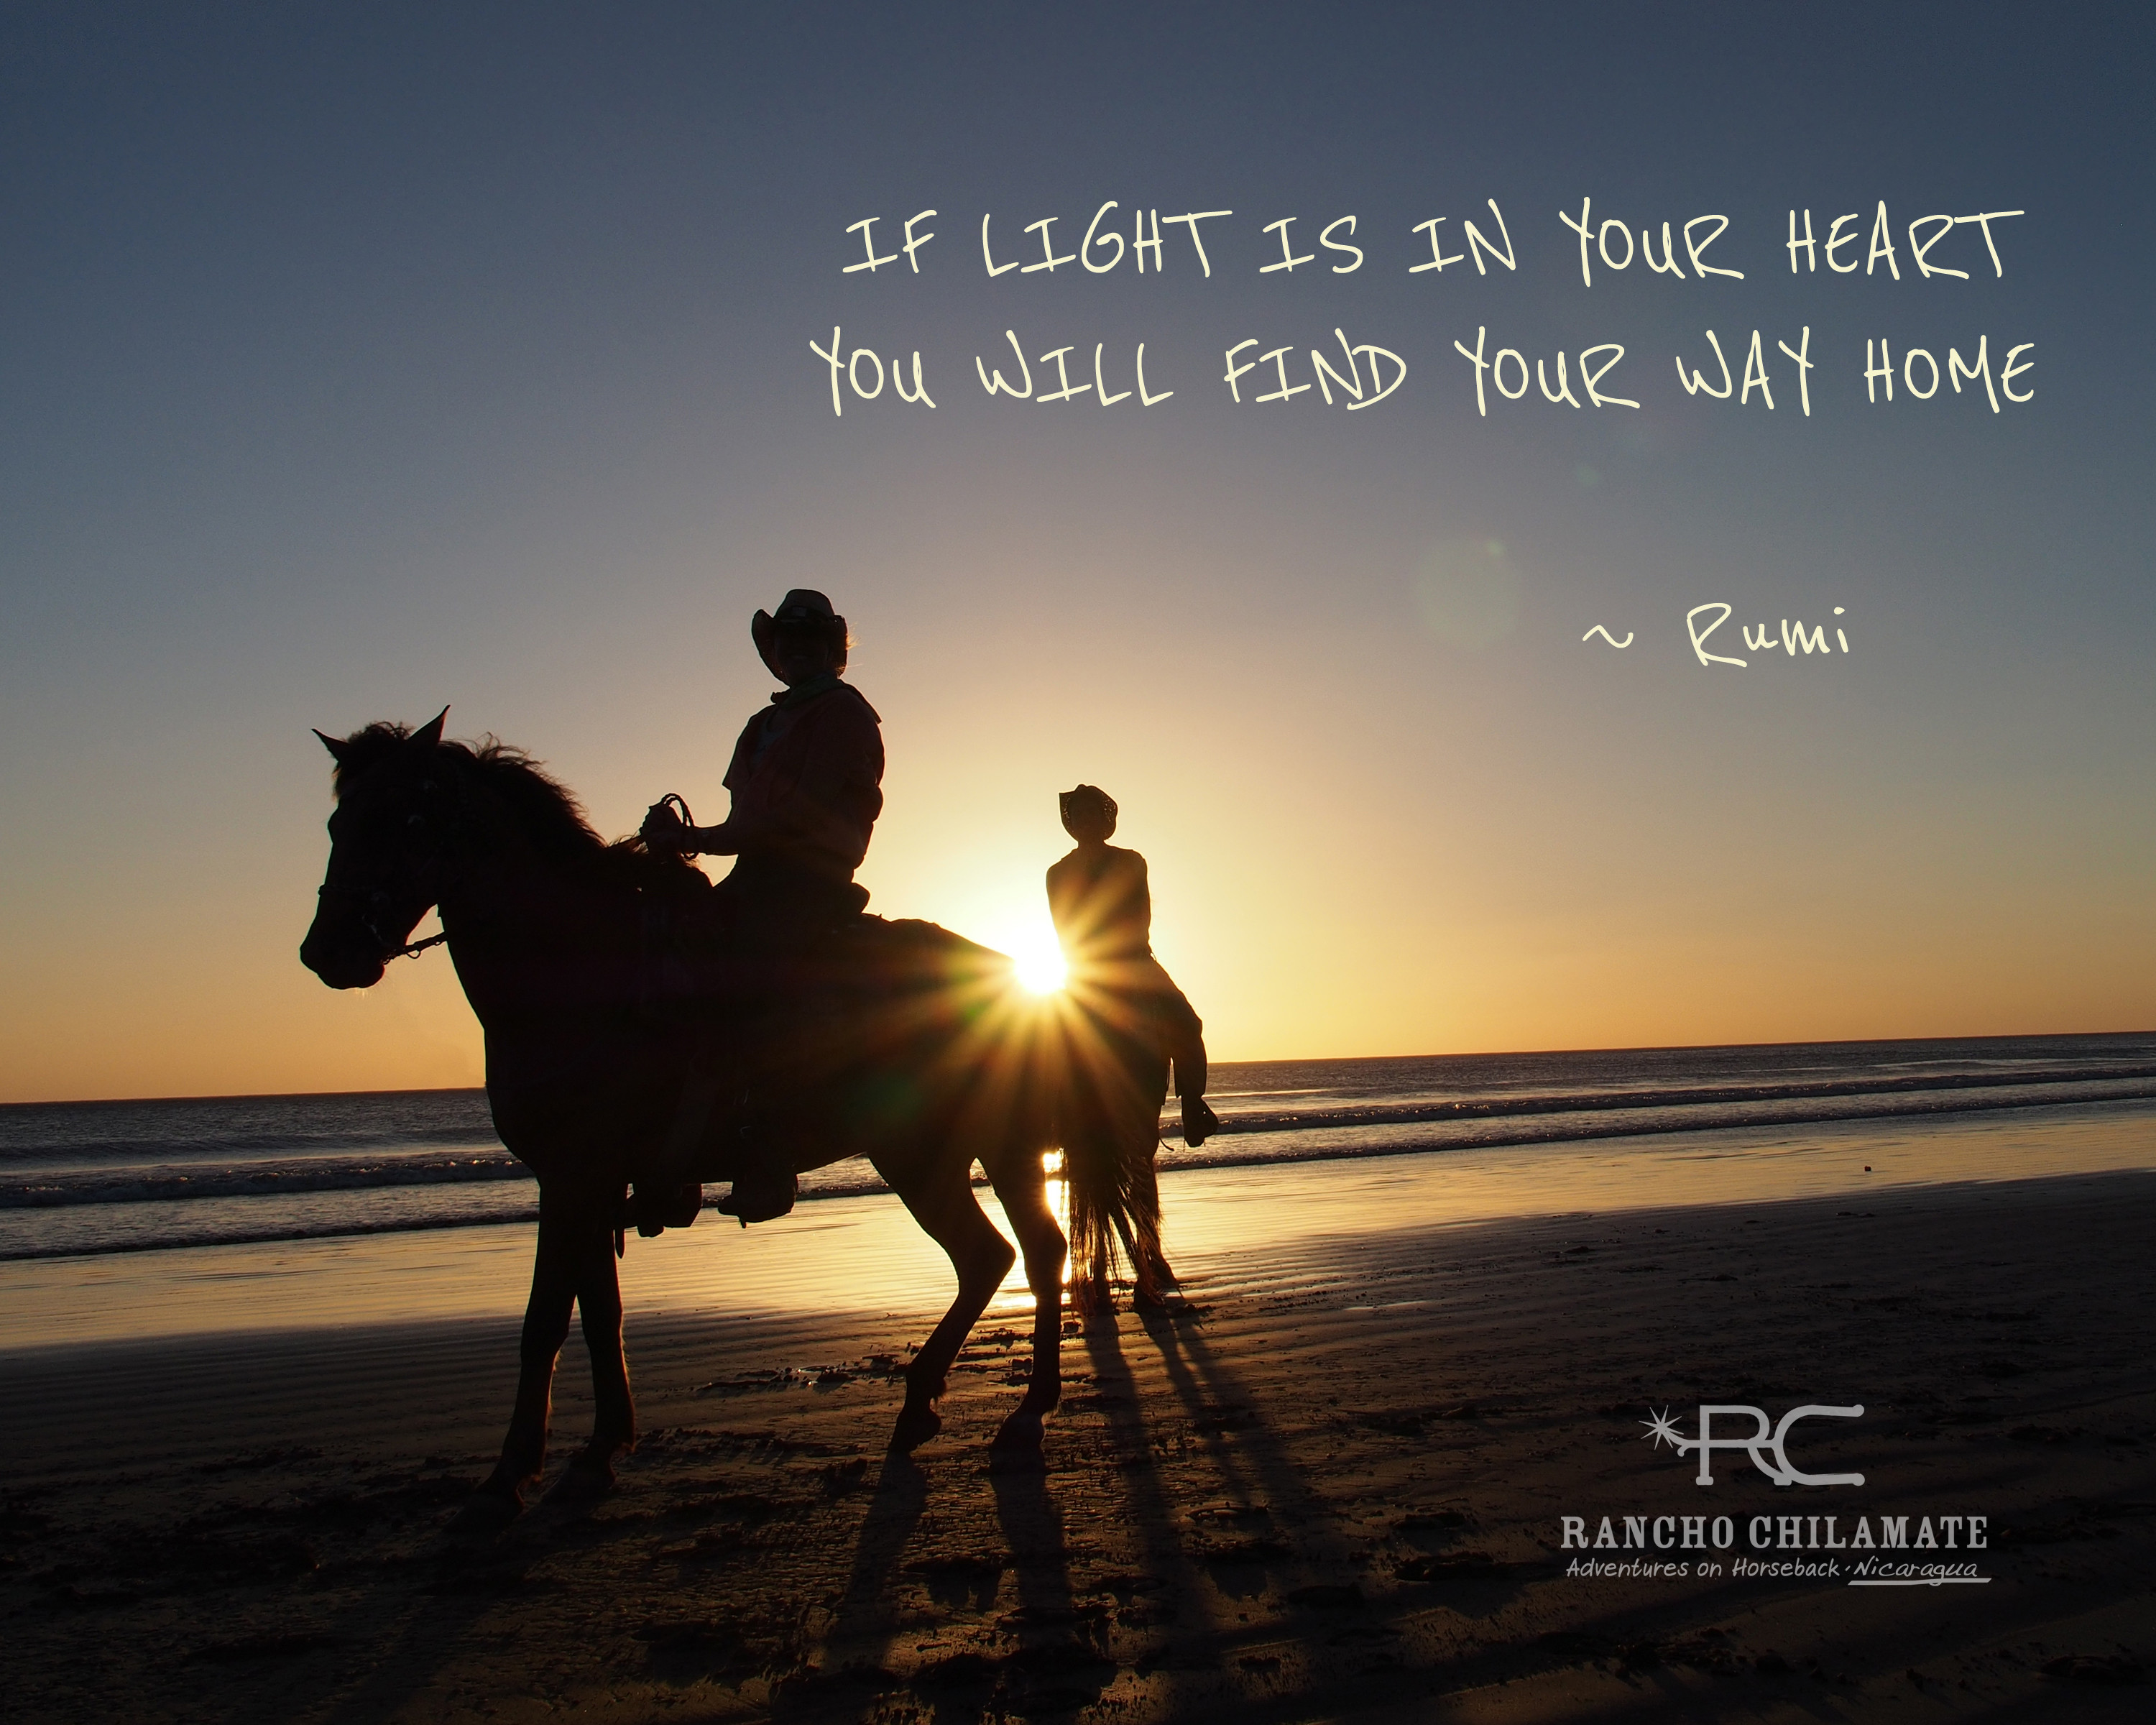 Cowboy Inspirational Quotes
 Inspirational Horse Quotes from Rancho Chilamate